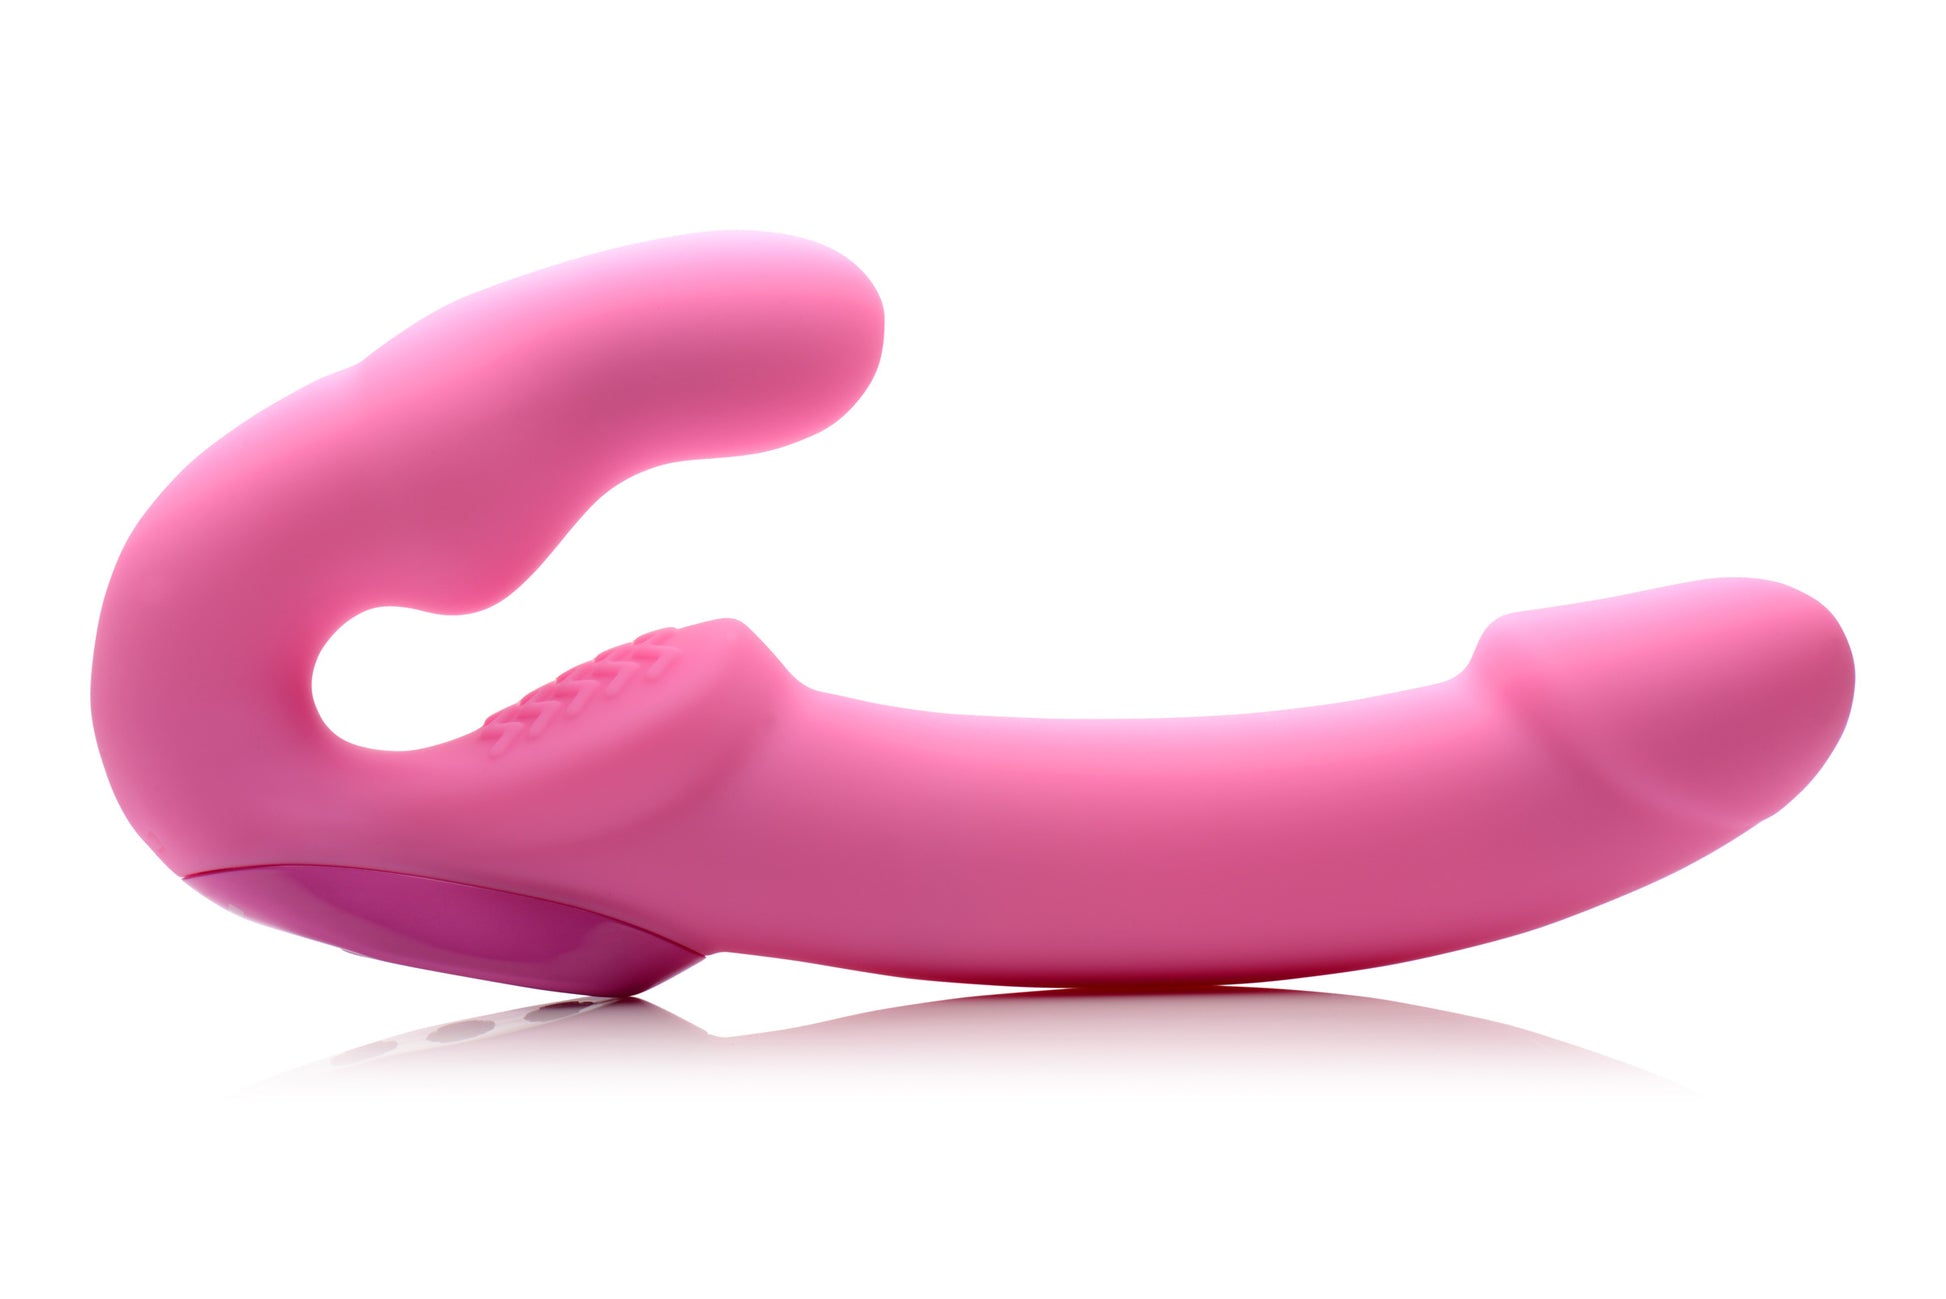 Urge Silicone Strapless Strap On With Remote- Pink - UABDSM